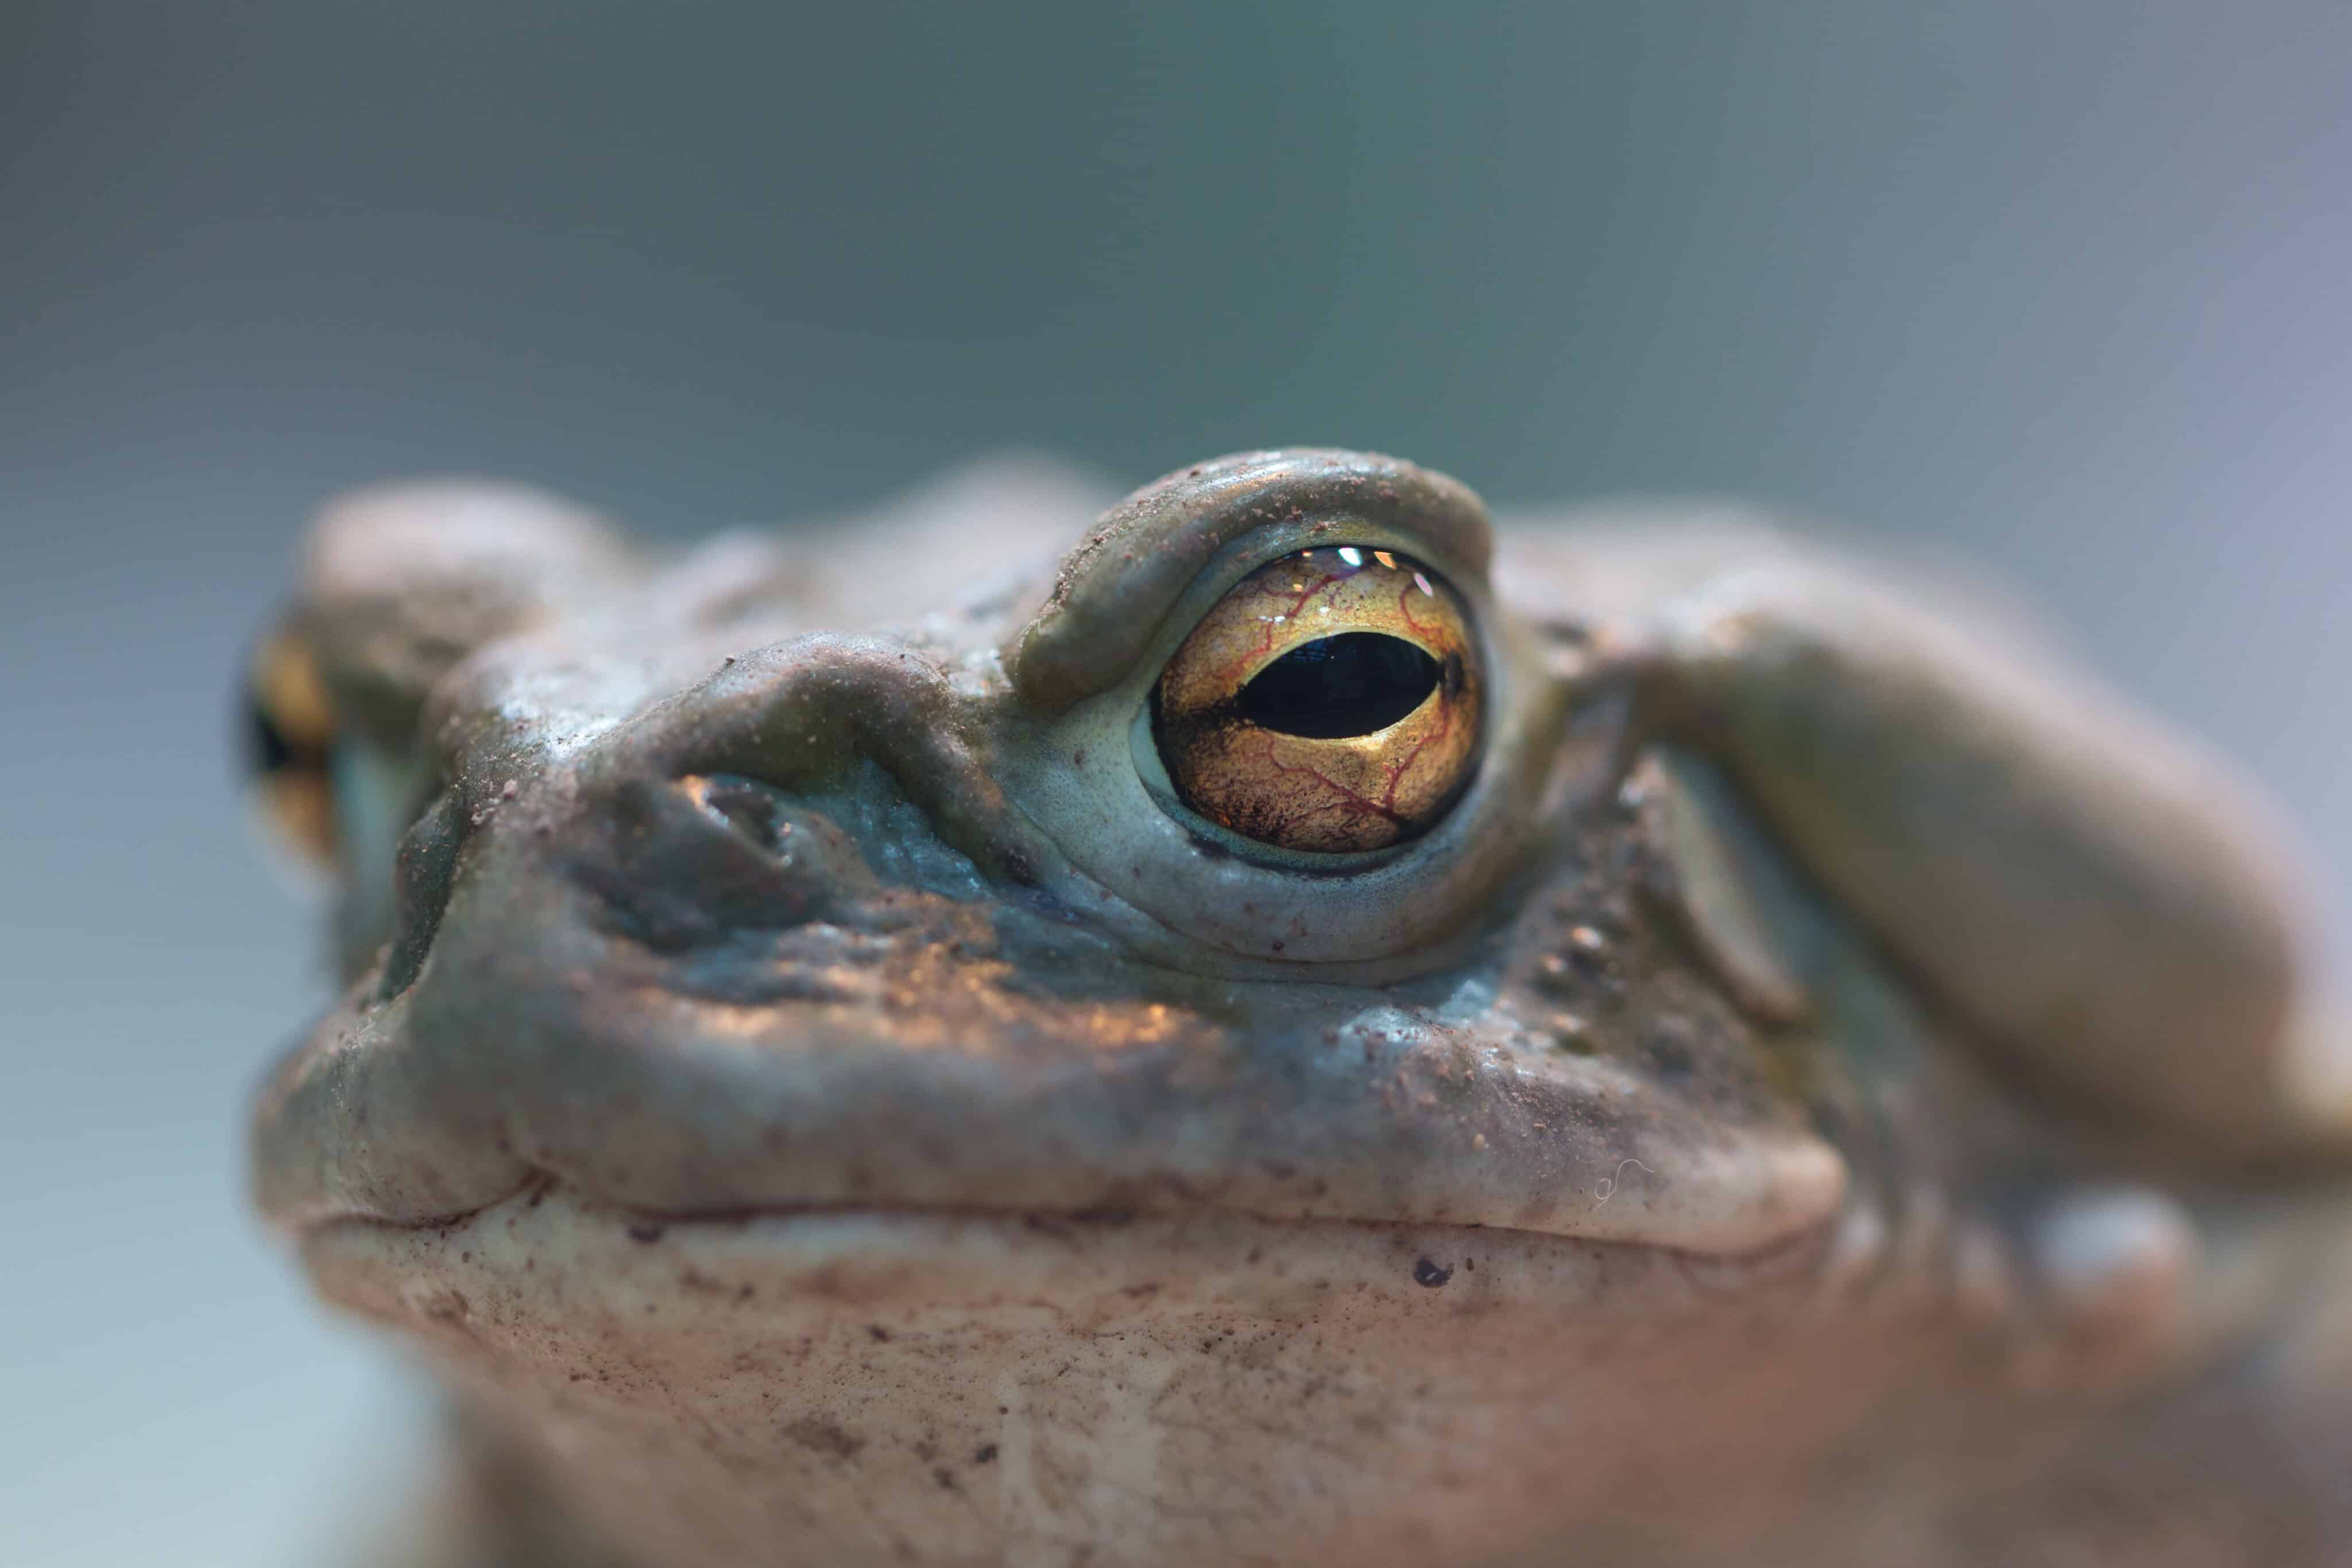 Psychedelic Toad Toxins Could Treat Depression, Anxiety Without Hallucinations